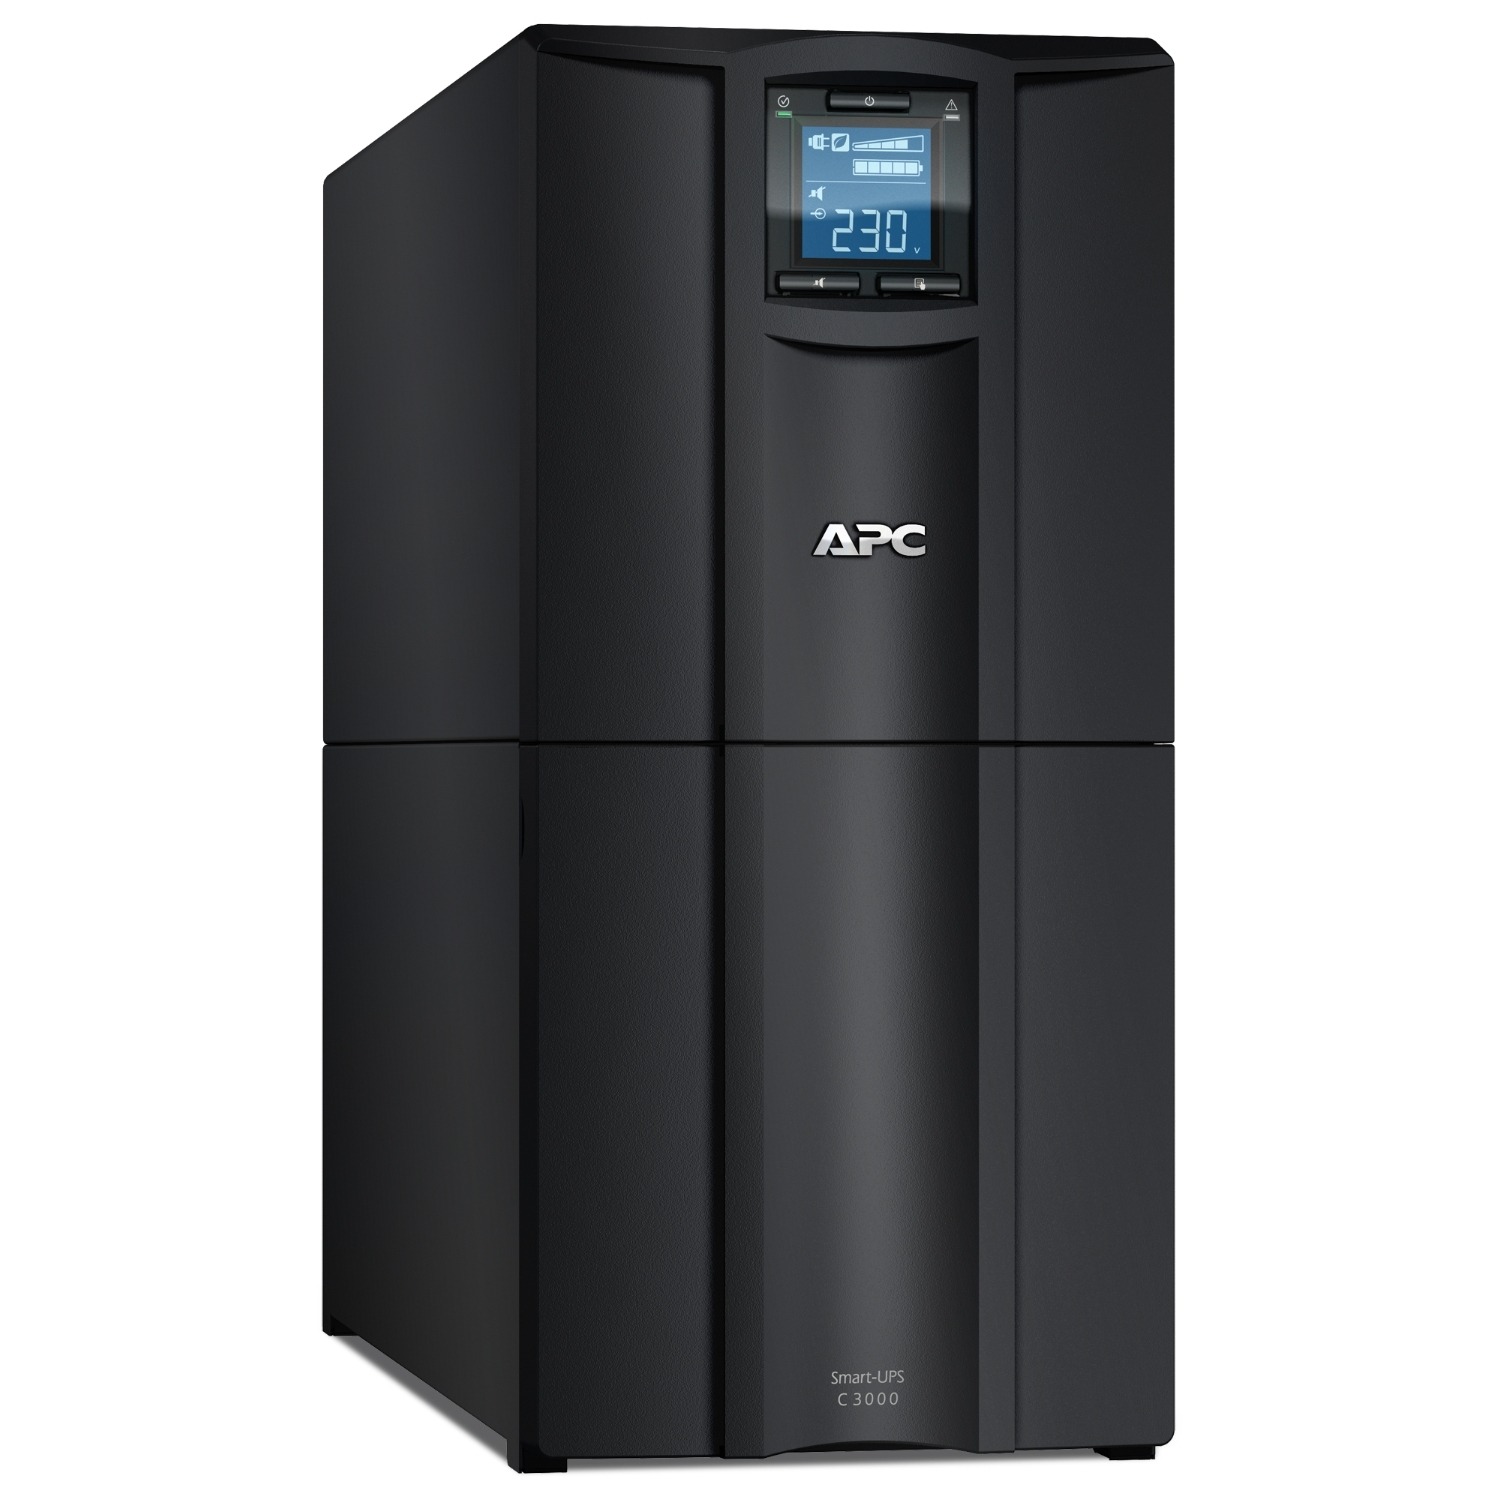 APC Smart-UPS C, Line Interactive, 3kVA, Tower, 230V, 8x IEC C13+1x IEC C19 outlets, USB and Serial communication, AVR, Graphic LCD